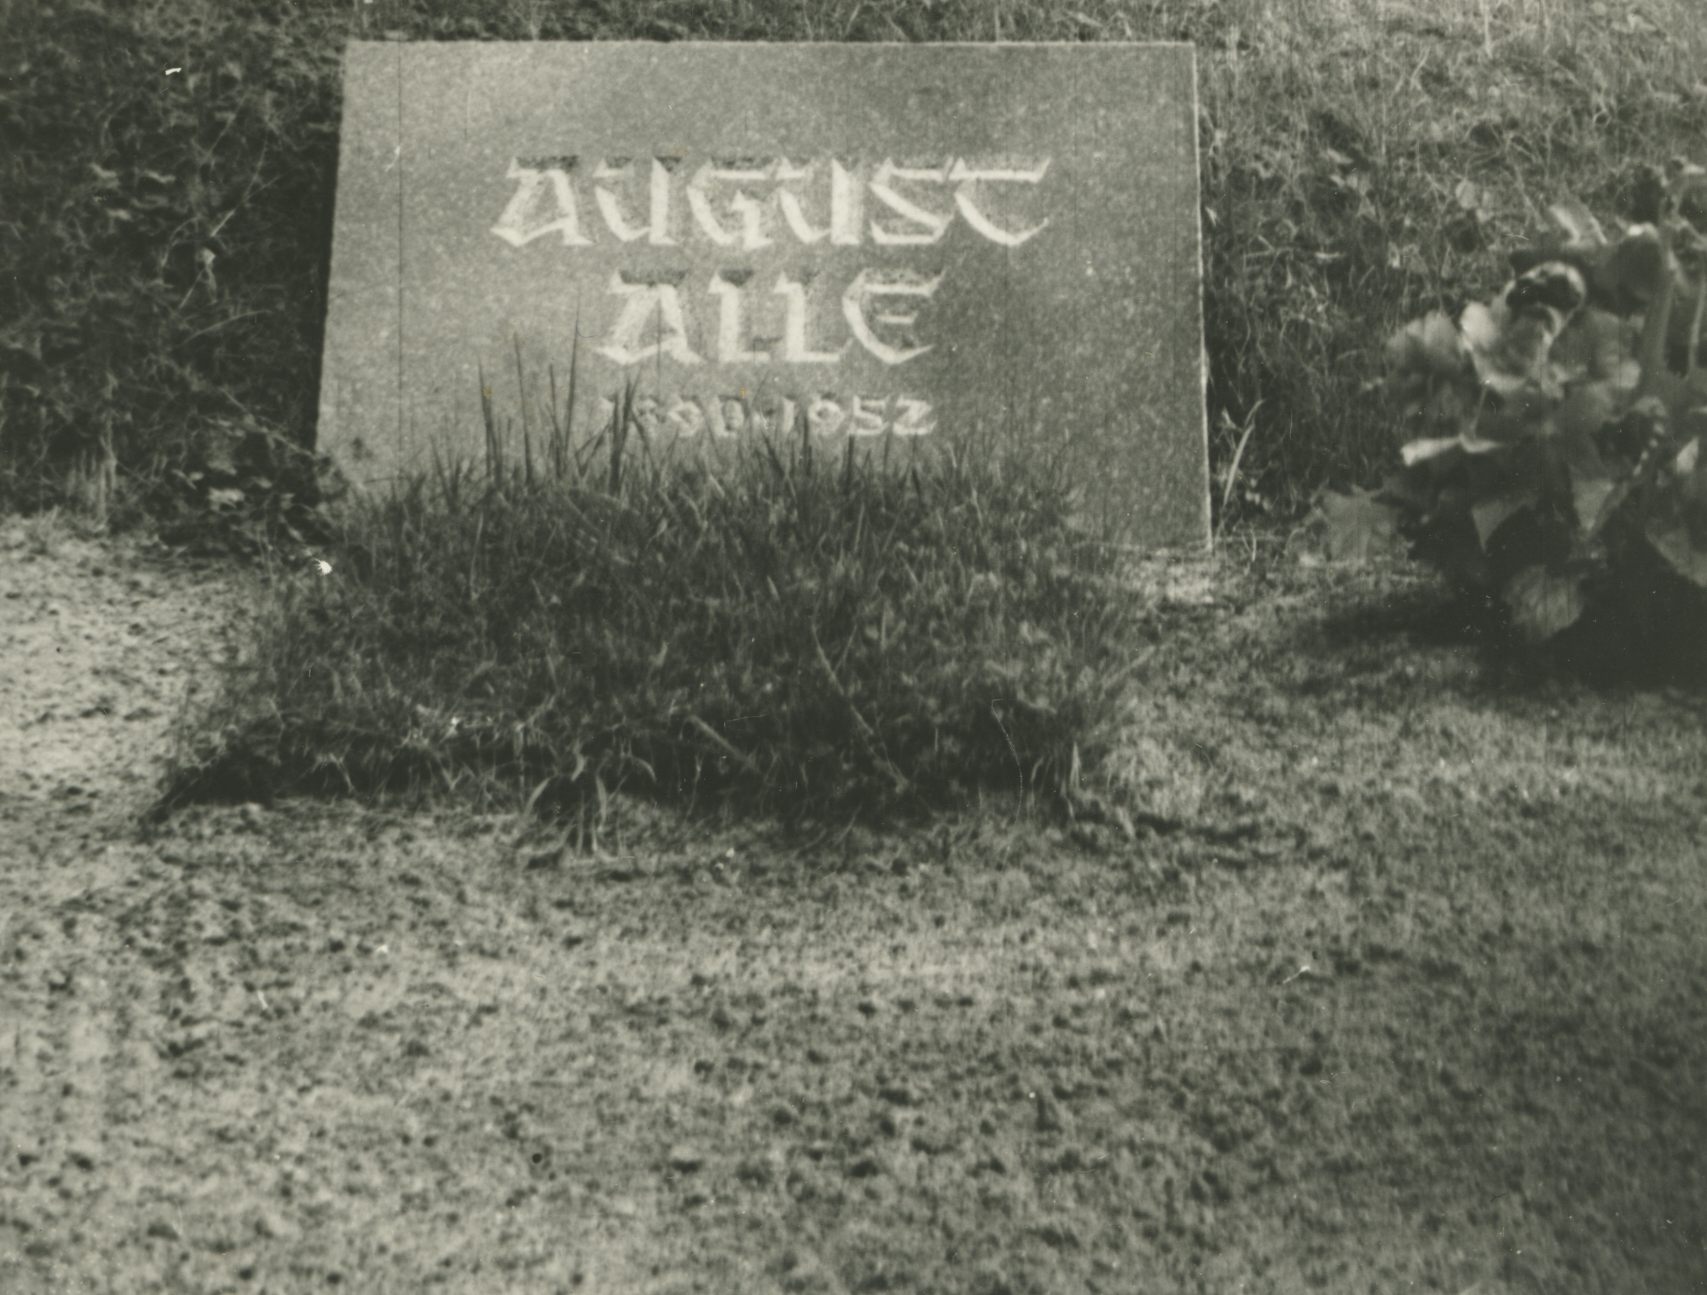 August All Grave